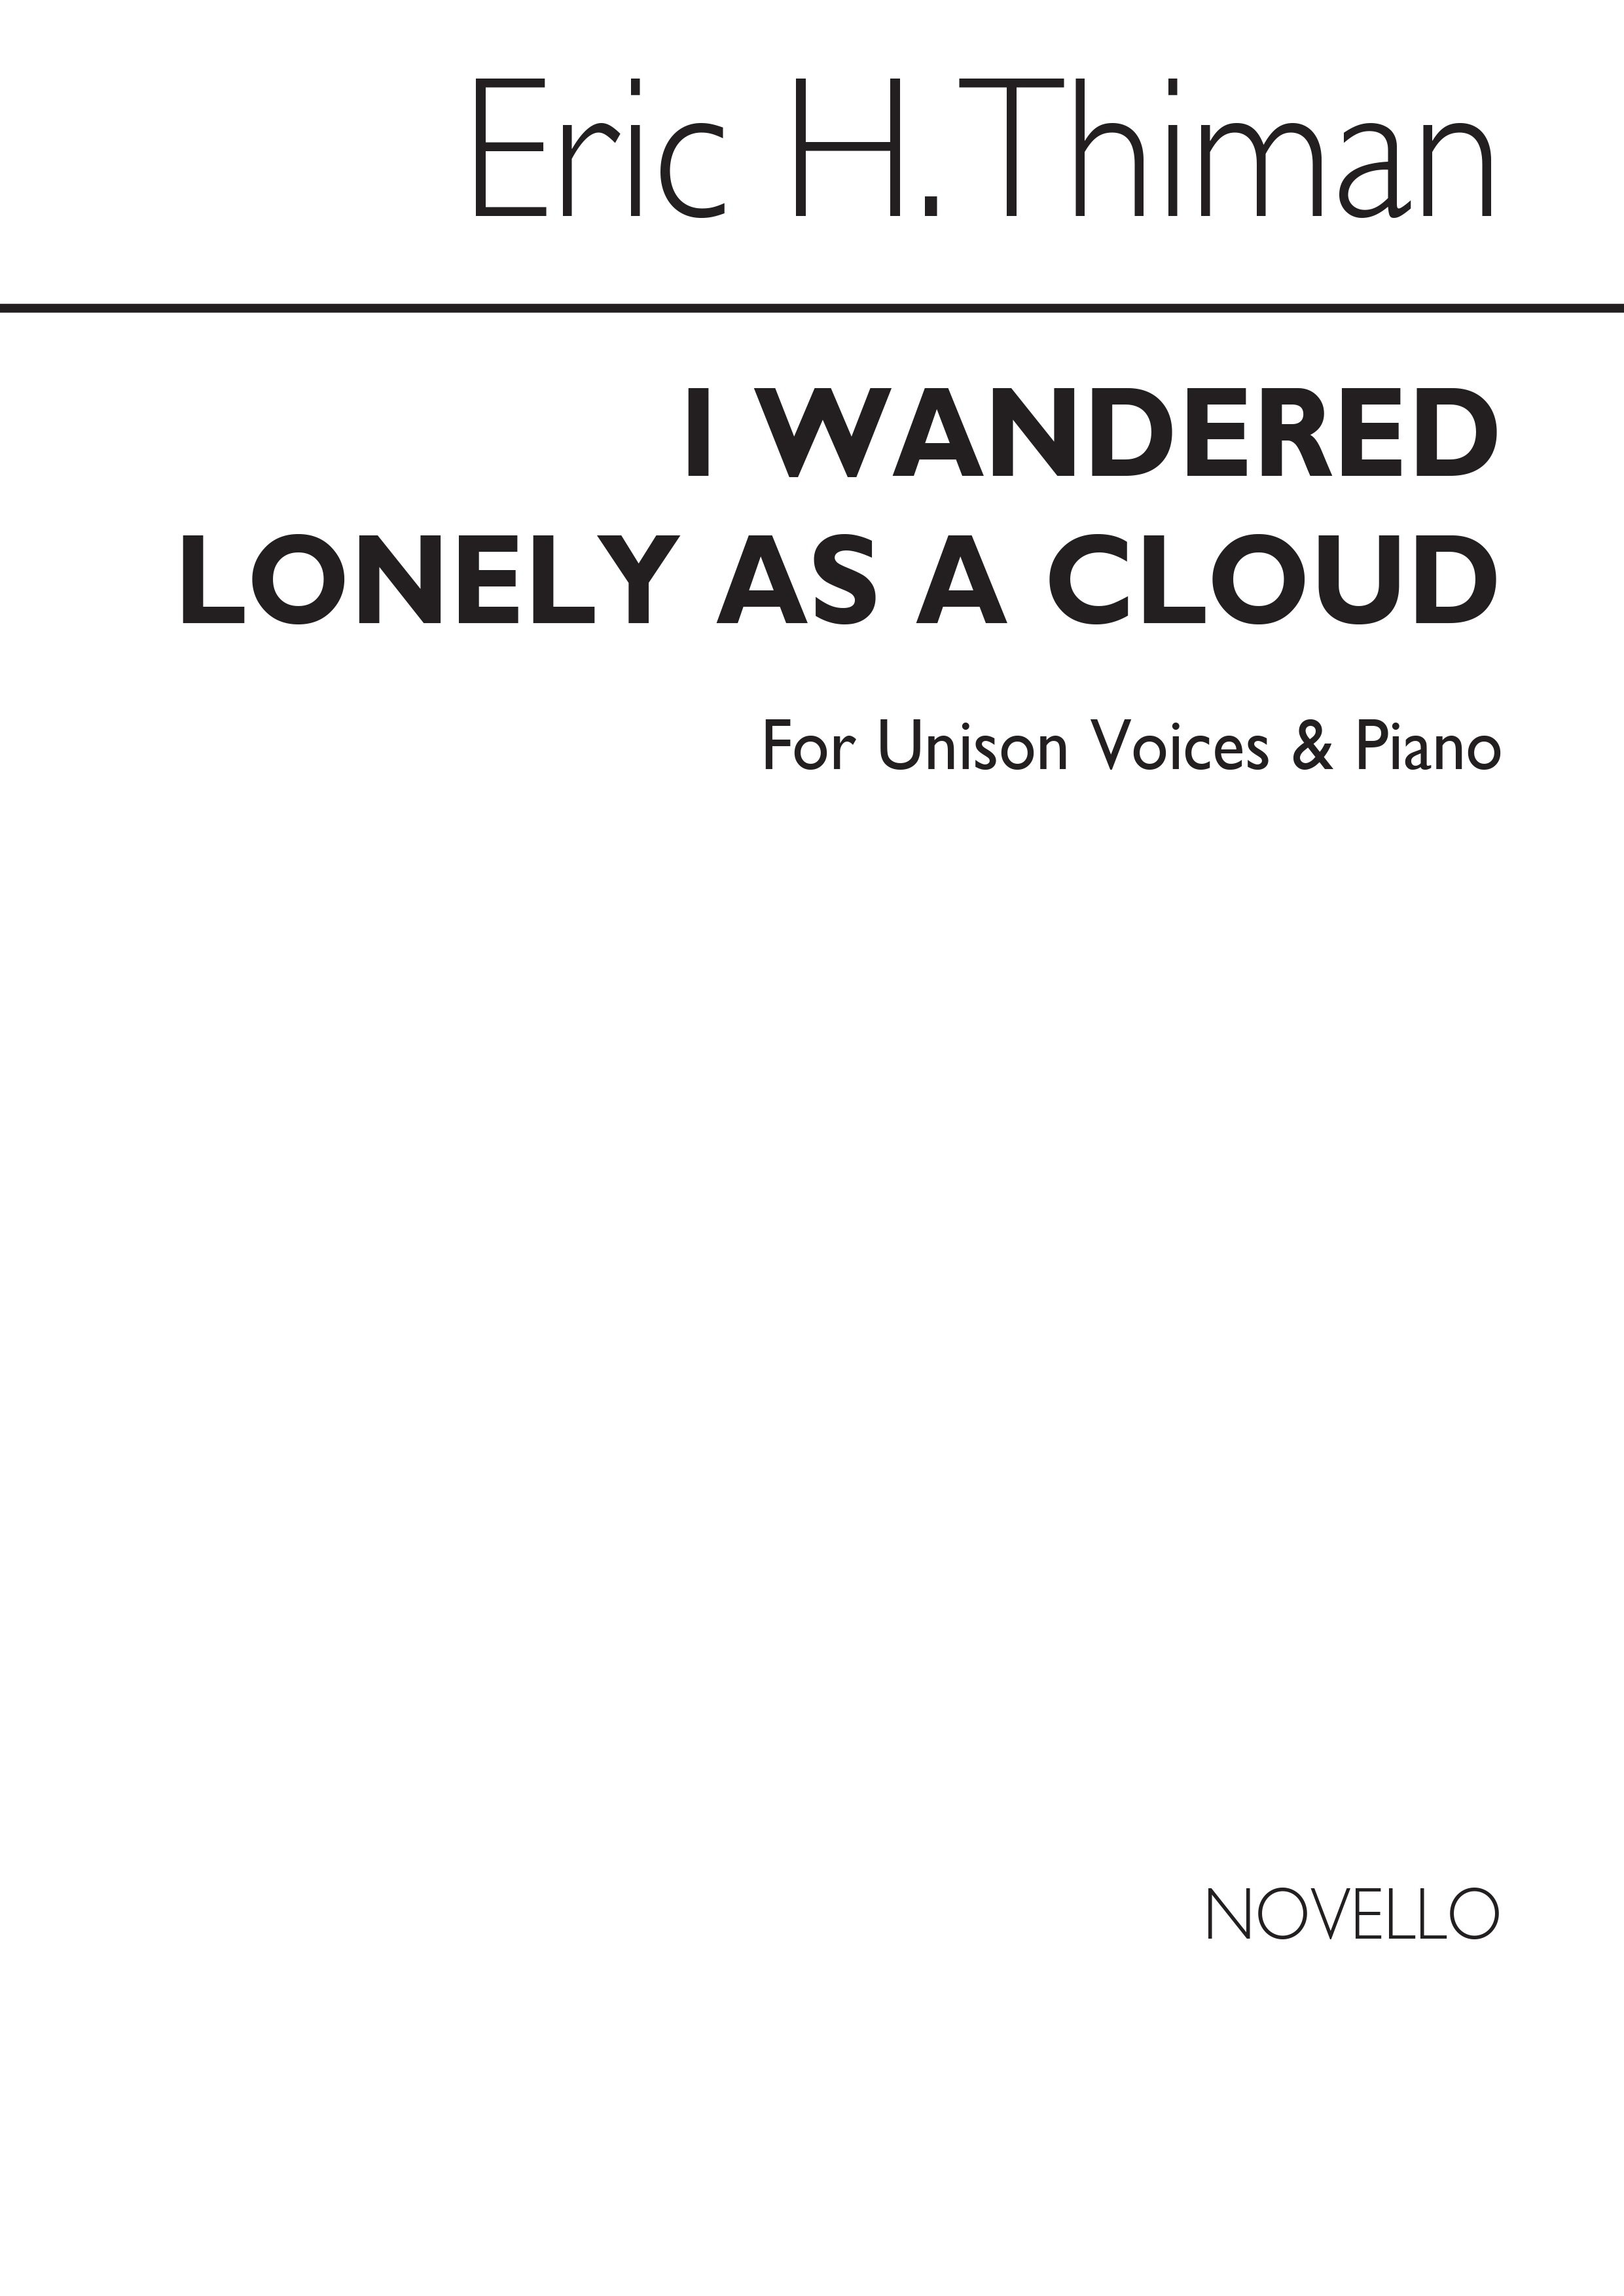 Eric Thiman: I Wandered Lonely As A Cloud (Unis): Voice: Vocal Score